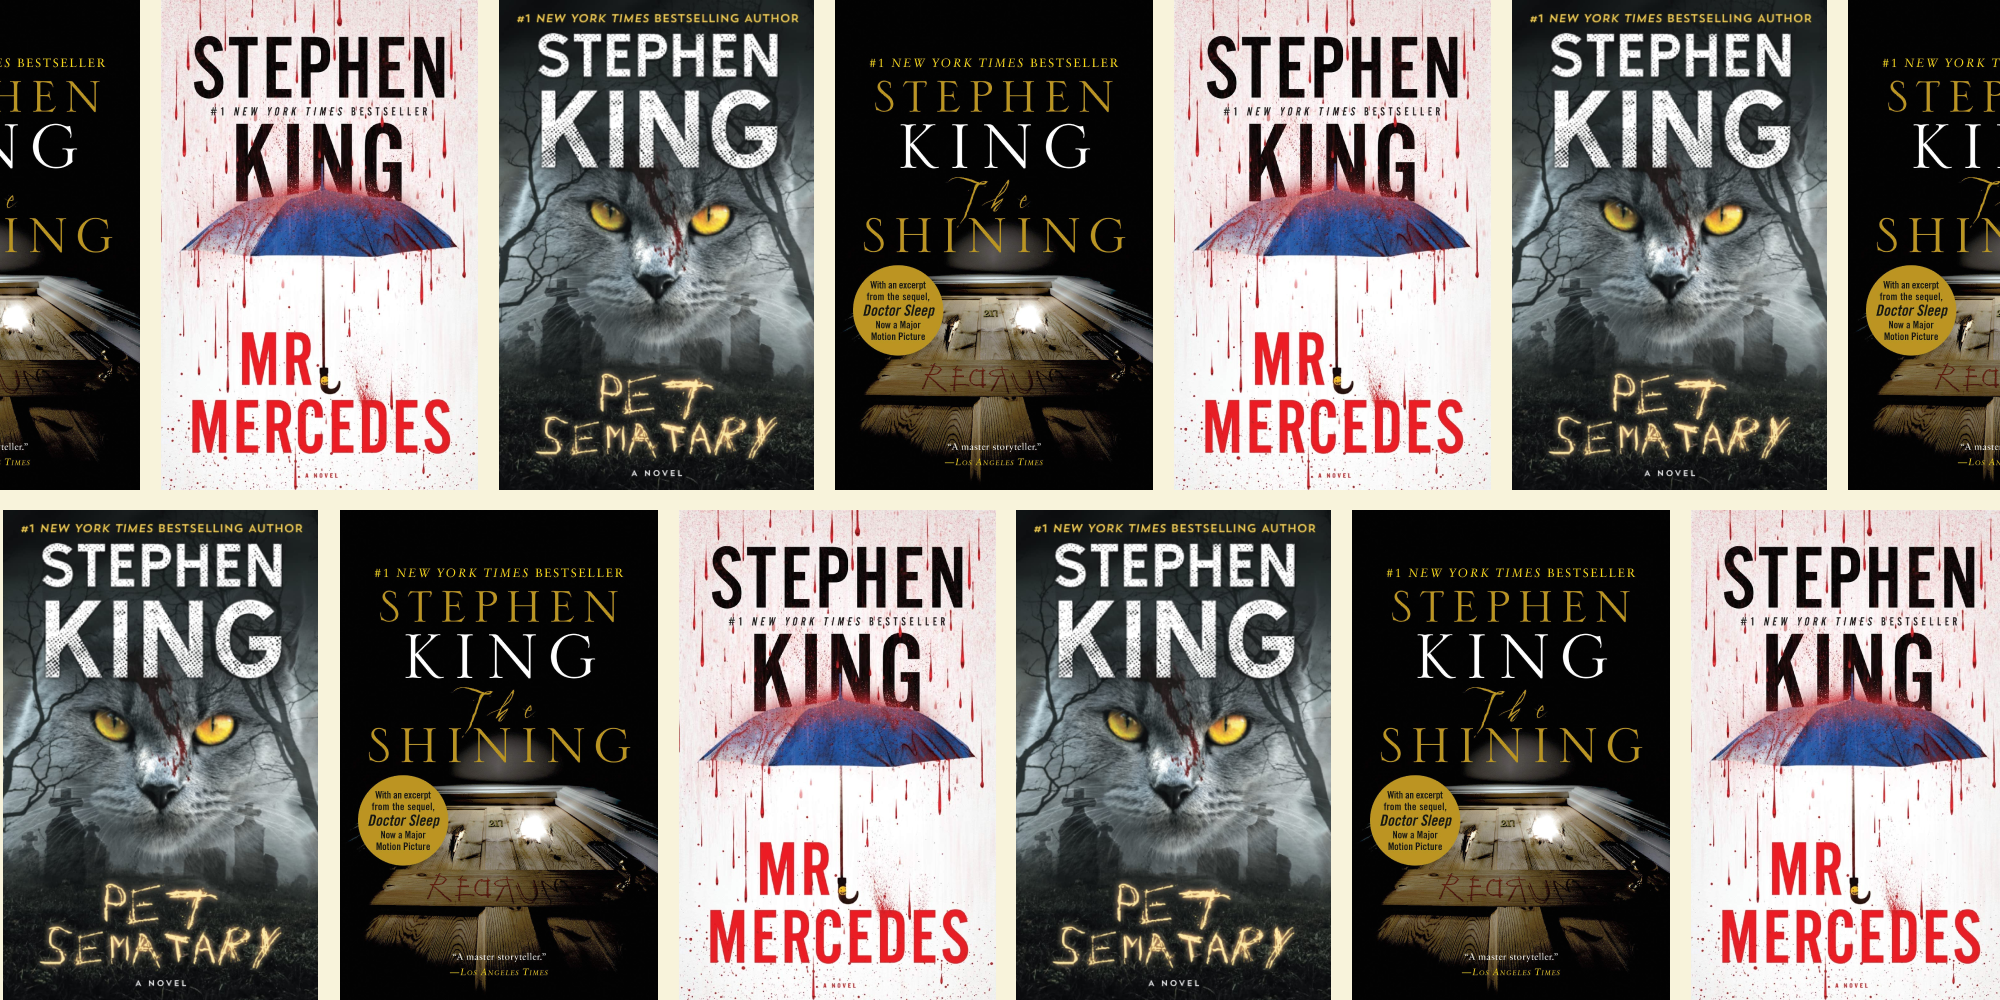 What is the most engrossing Stephen King book?